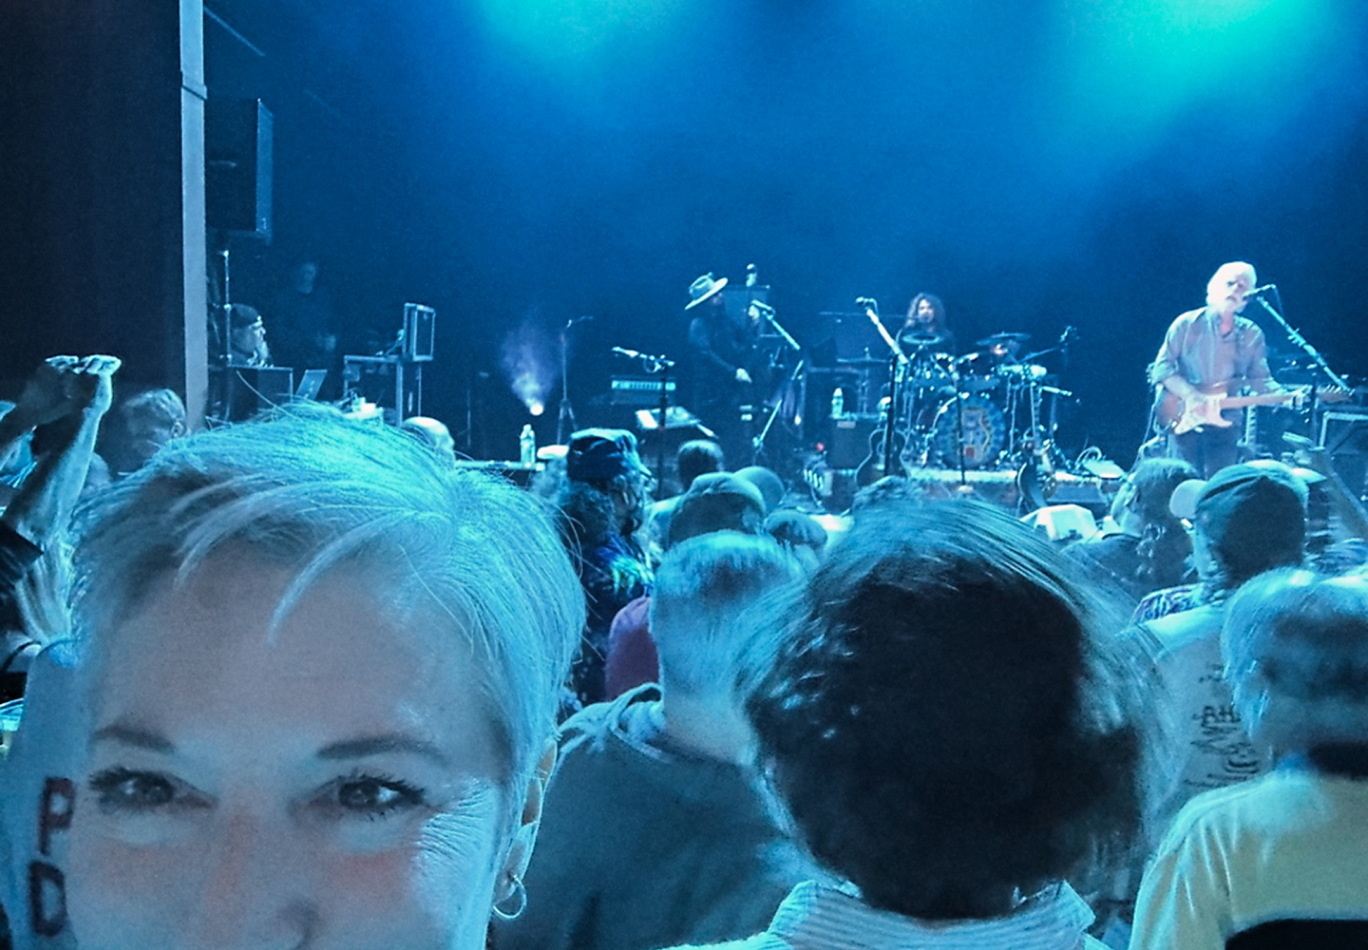 Michelle Avary at a concert